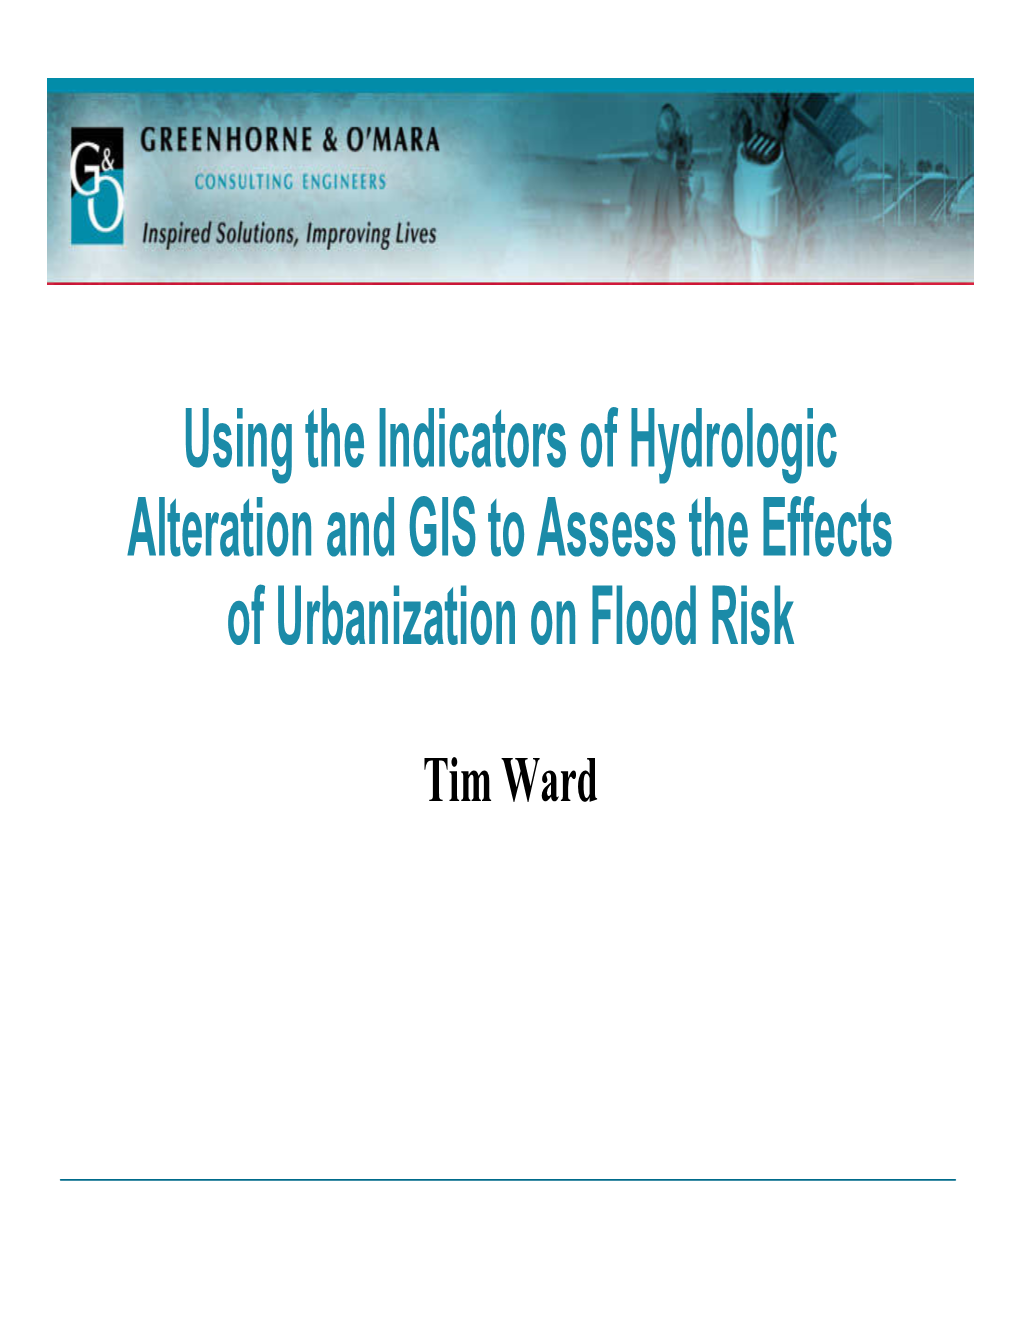 Using the Indicators of Hydrologic Alteration and GIS to Assess the Effects of Urbanization on Flood Risk